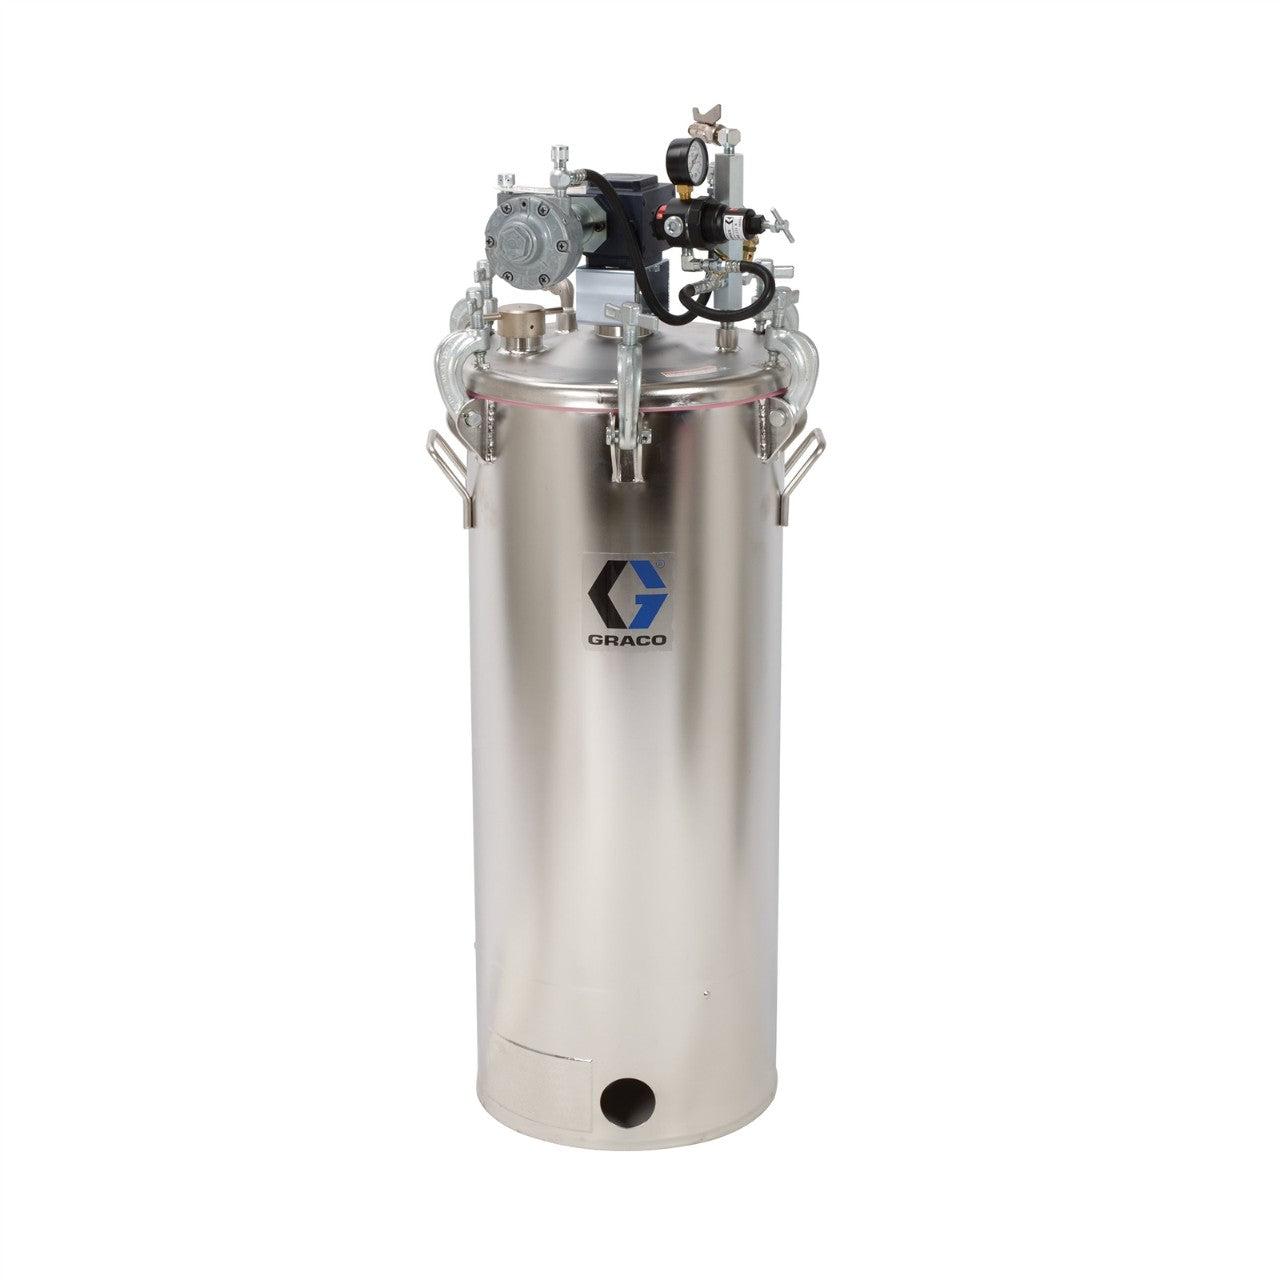 15 Gallon Low Pressure (HVLP) Pot with Agitator, Regulated to 15 psi, ASME Rated, 44.6 in (113.2 cm), 101 lbs (46 kg), SST